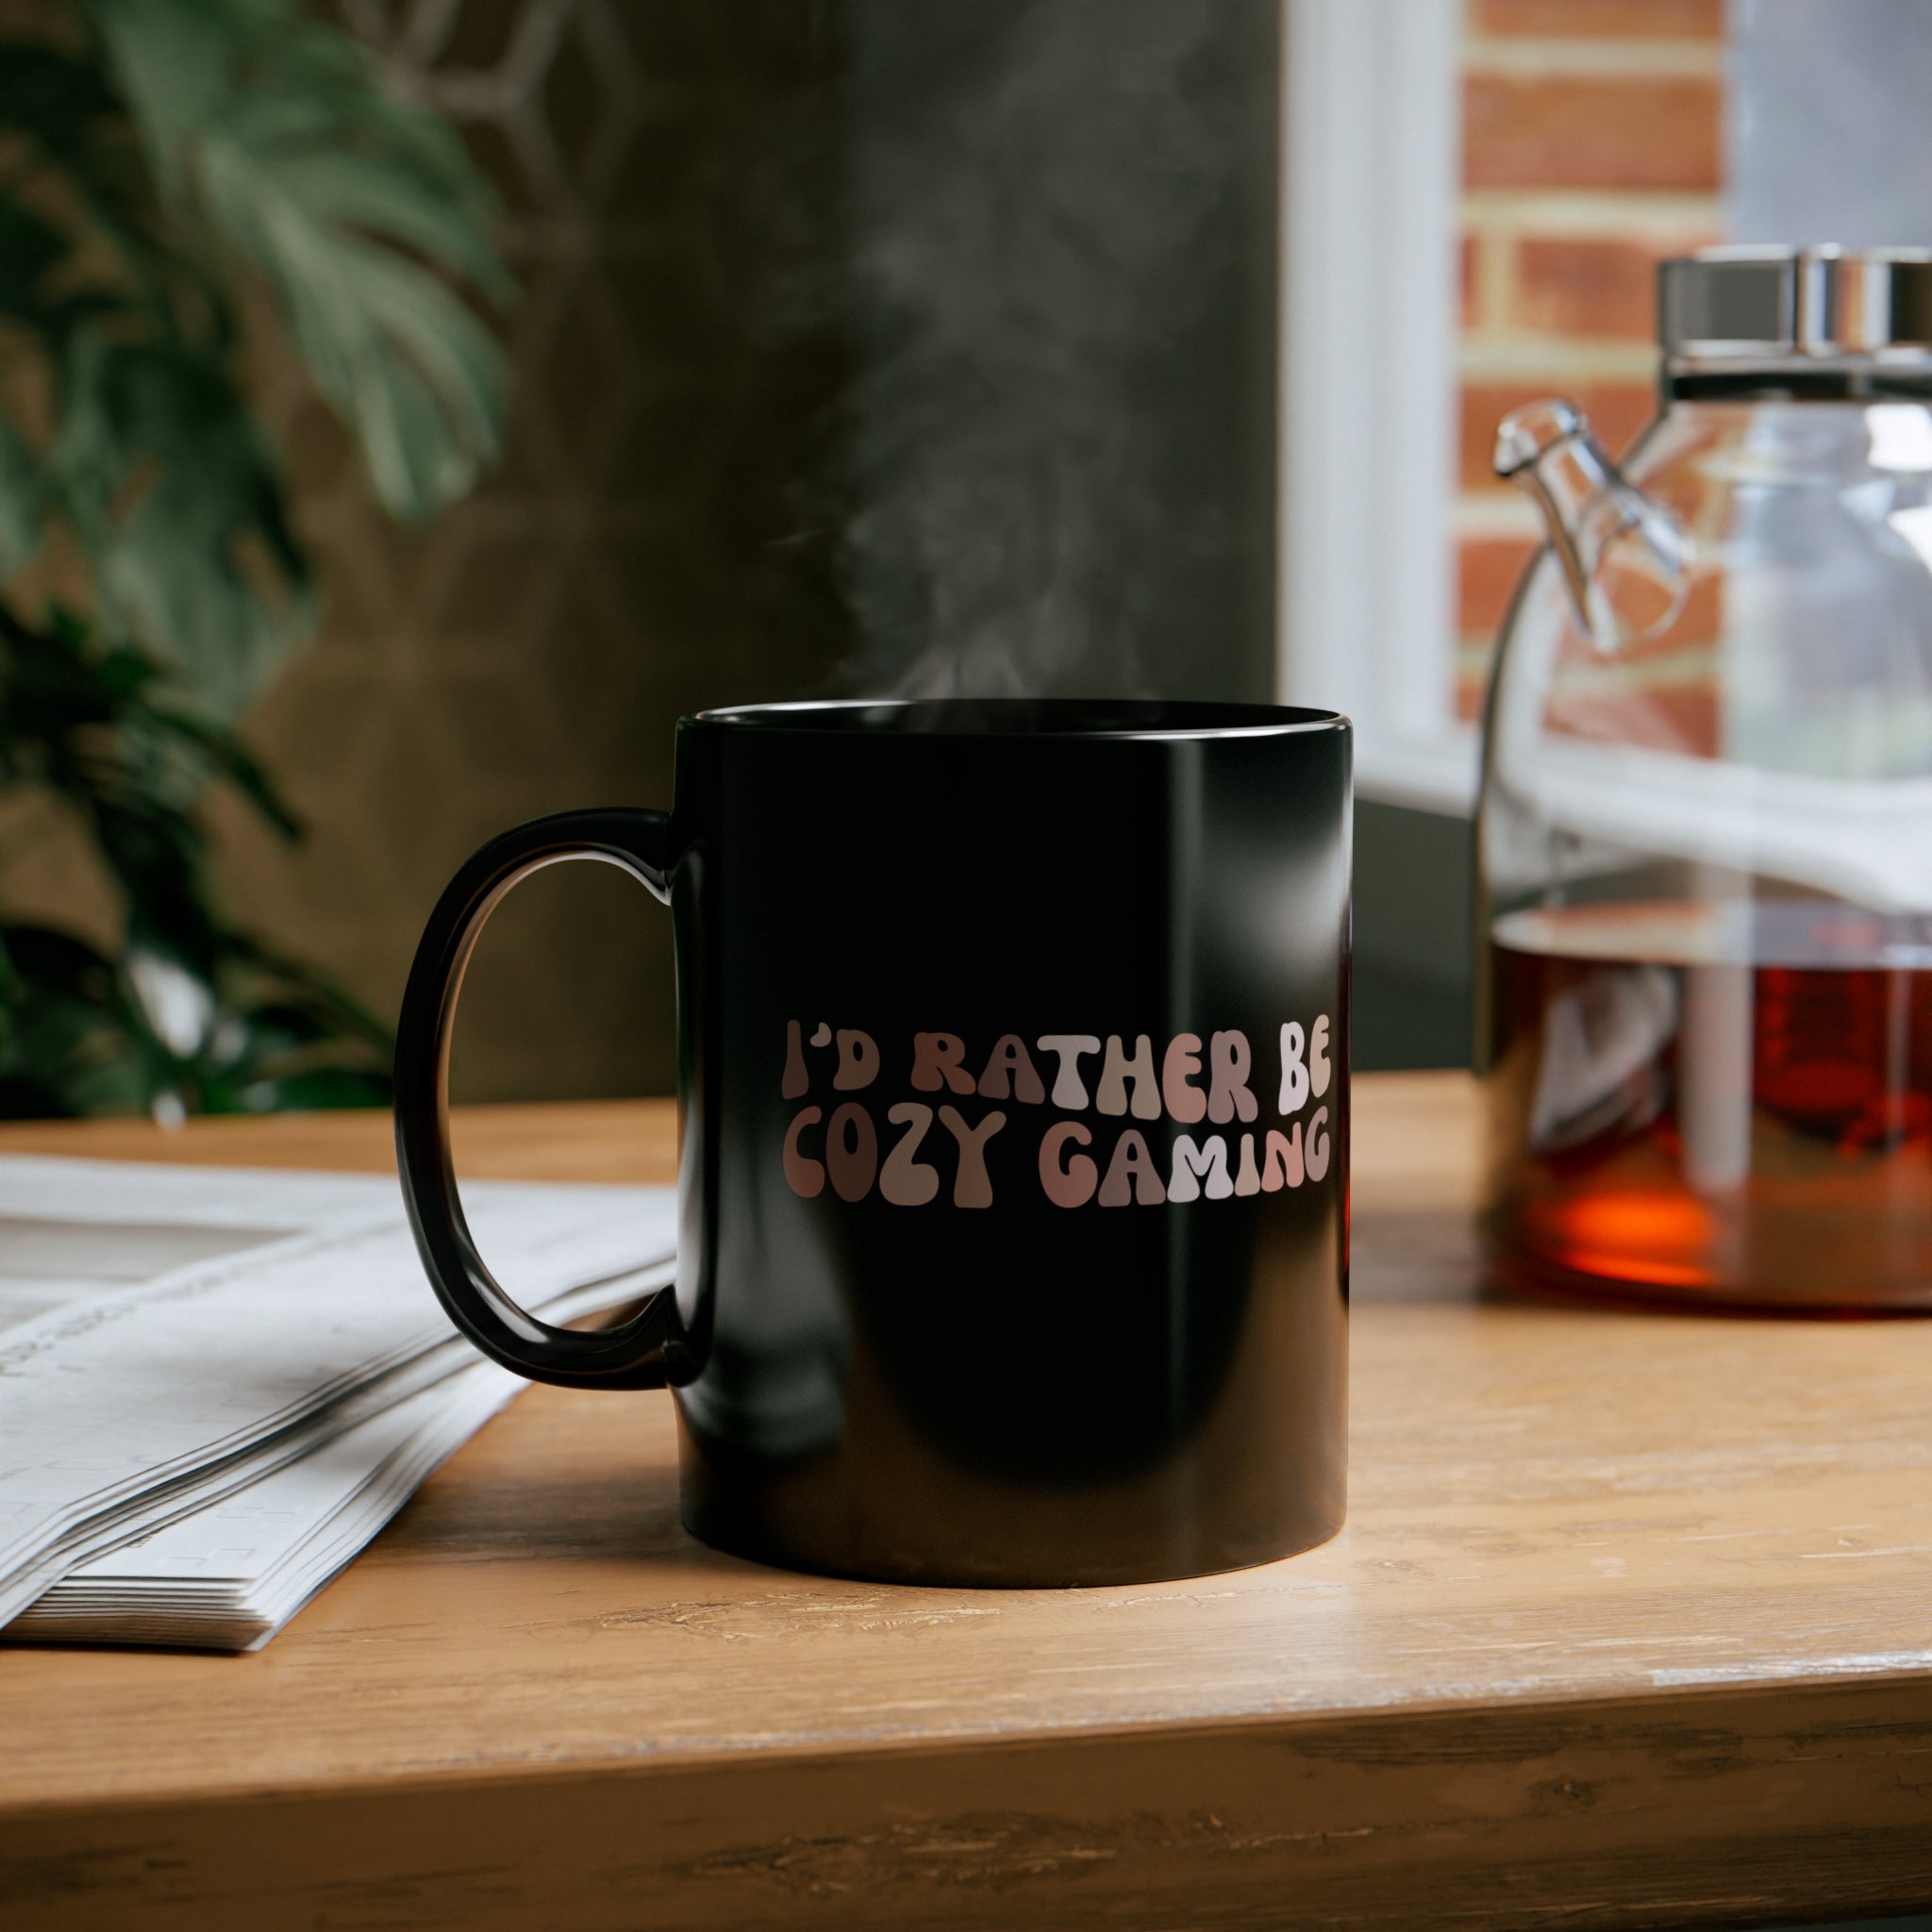 I'd Rather Be Cozy Gaming Coffee Mug  - Gift for Gamers